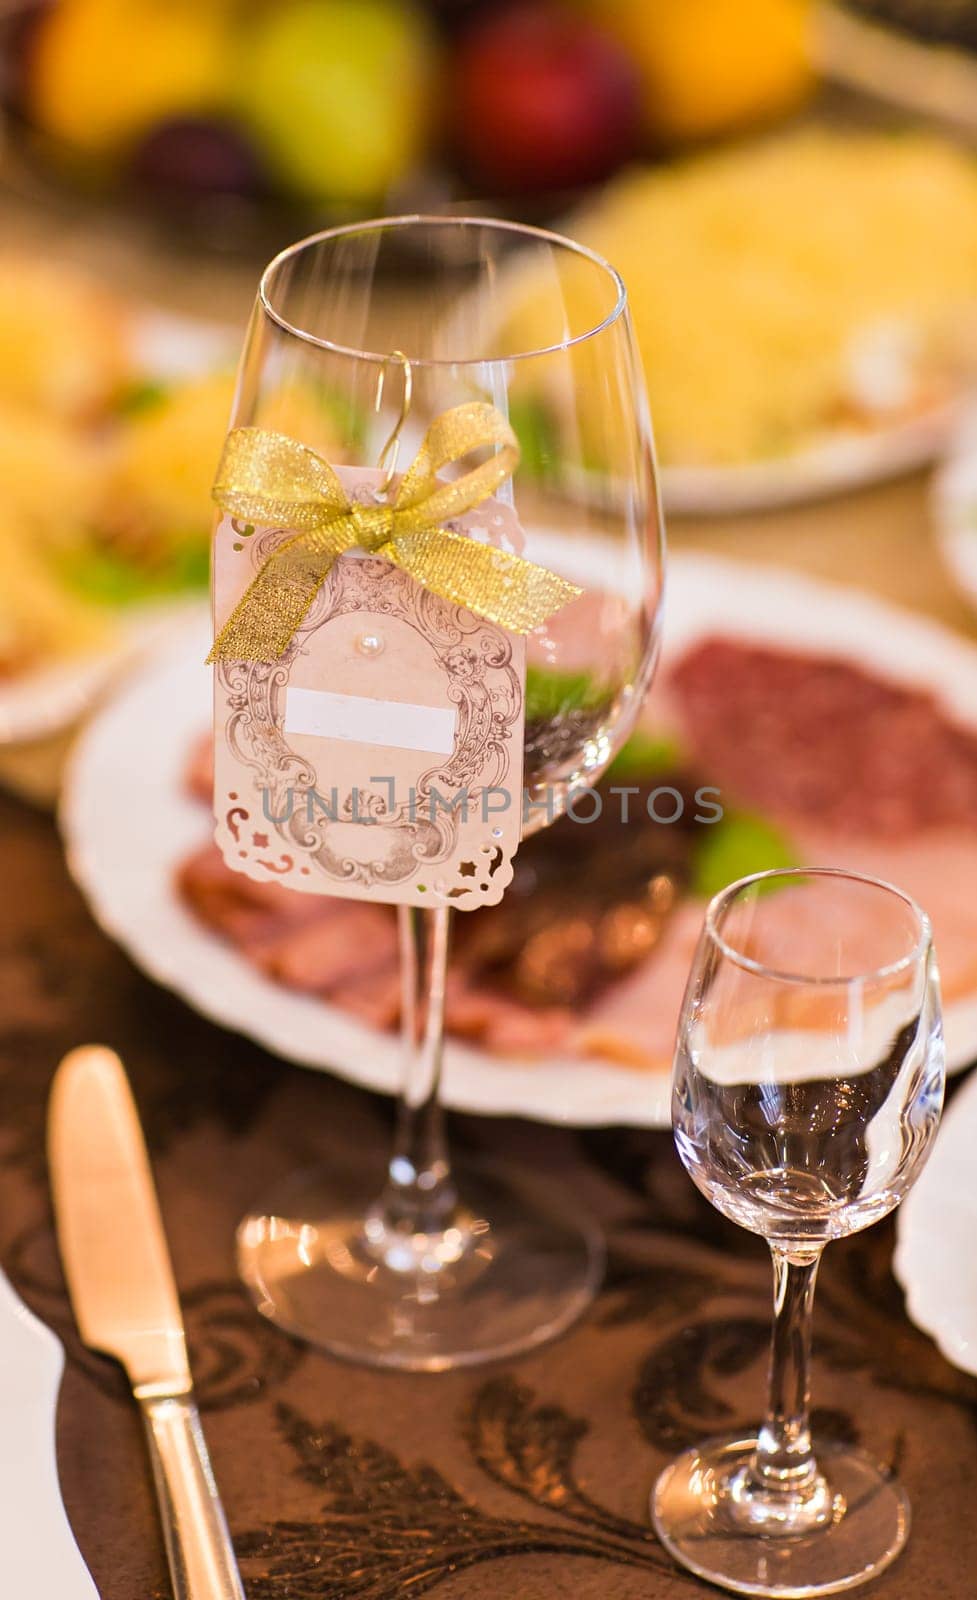 Close-up of wine glass and name card on festive table by Satura86